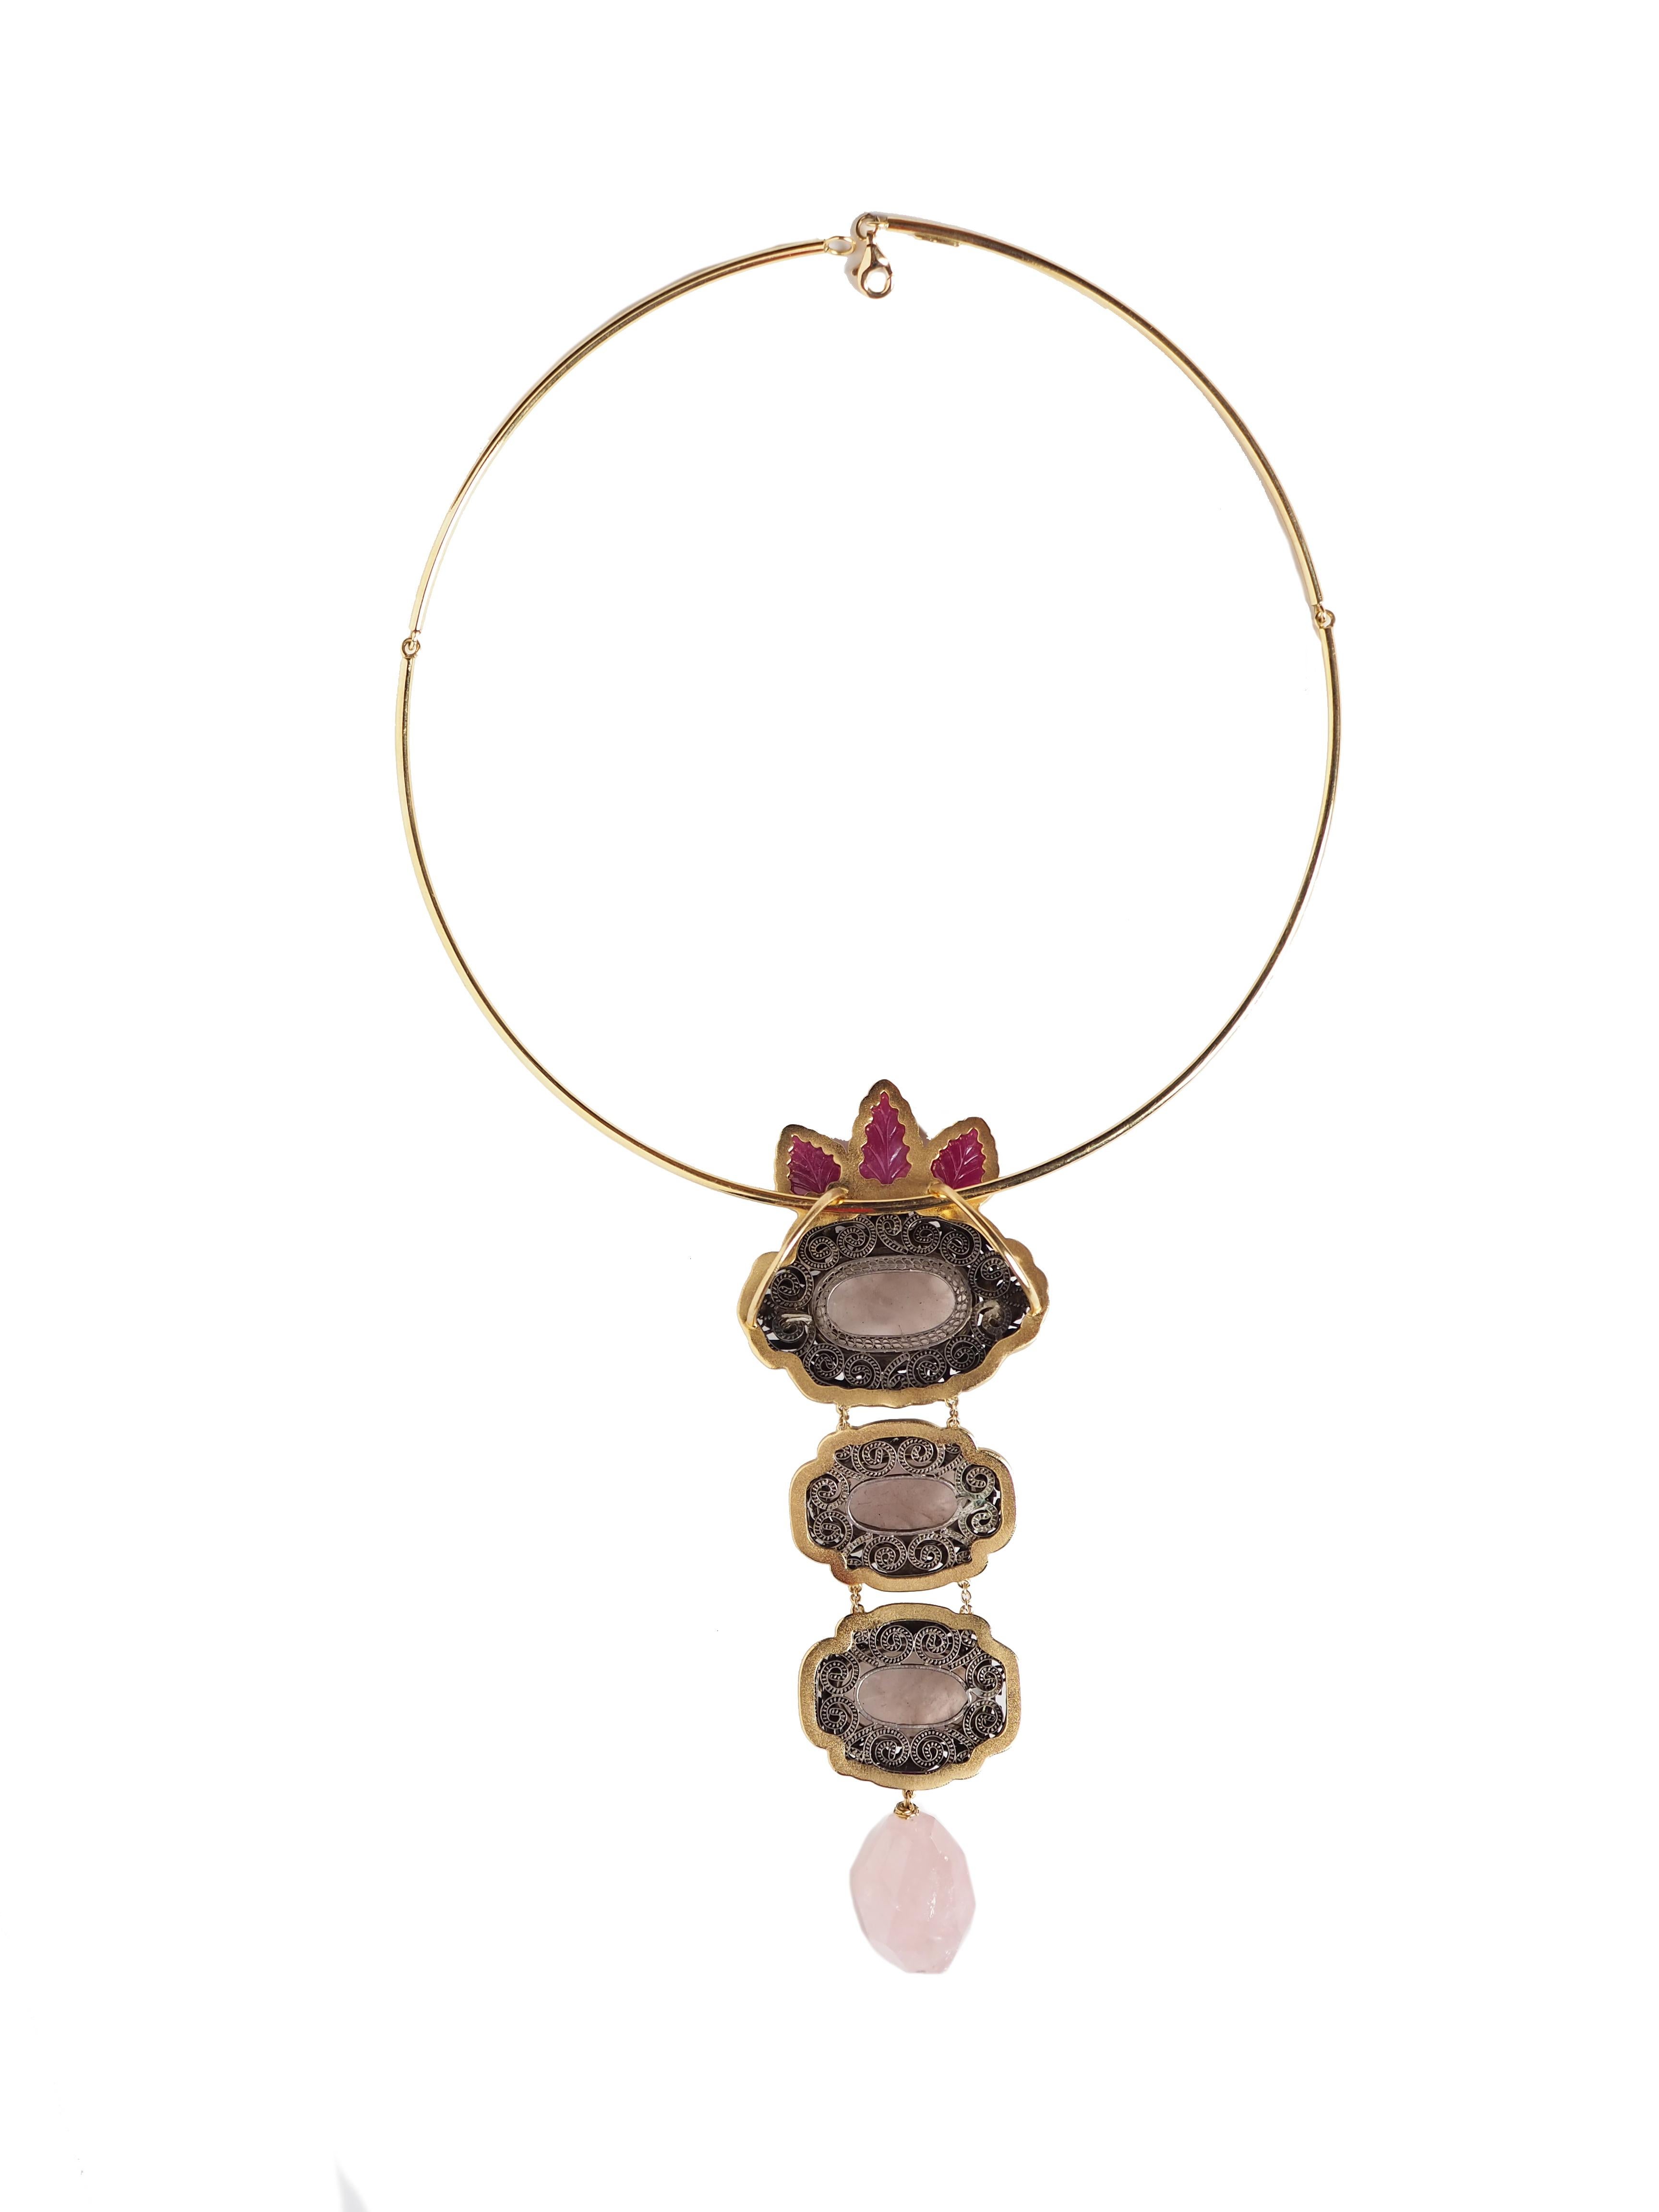 Very special necklace with antiques  original cinese buttons enamel with decorations,  carved rose quartz, ruby leaf,  gold 18 kt gr. 14,90. Total length 12cm. Gold semi rigid necklace gold 18kt  gr. 12.
All Giulia Colussi jewelry is new and has